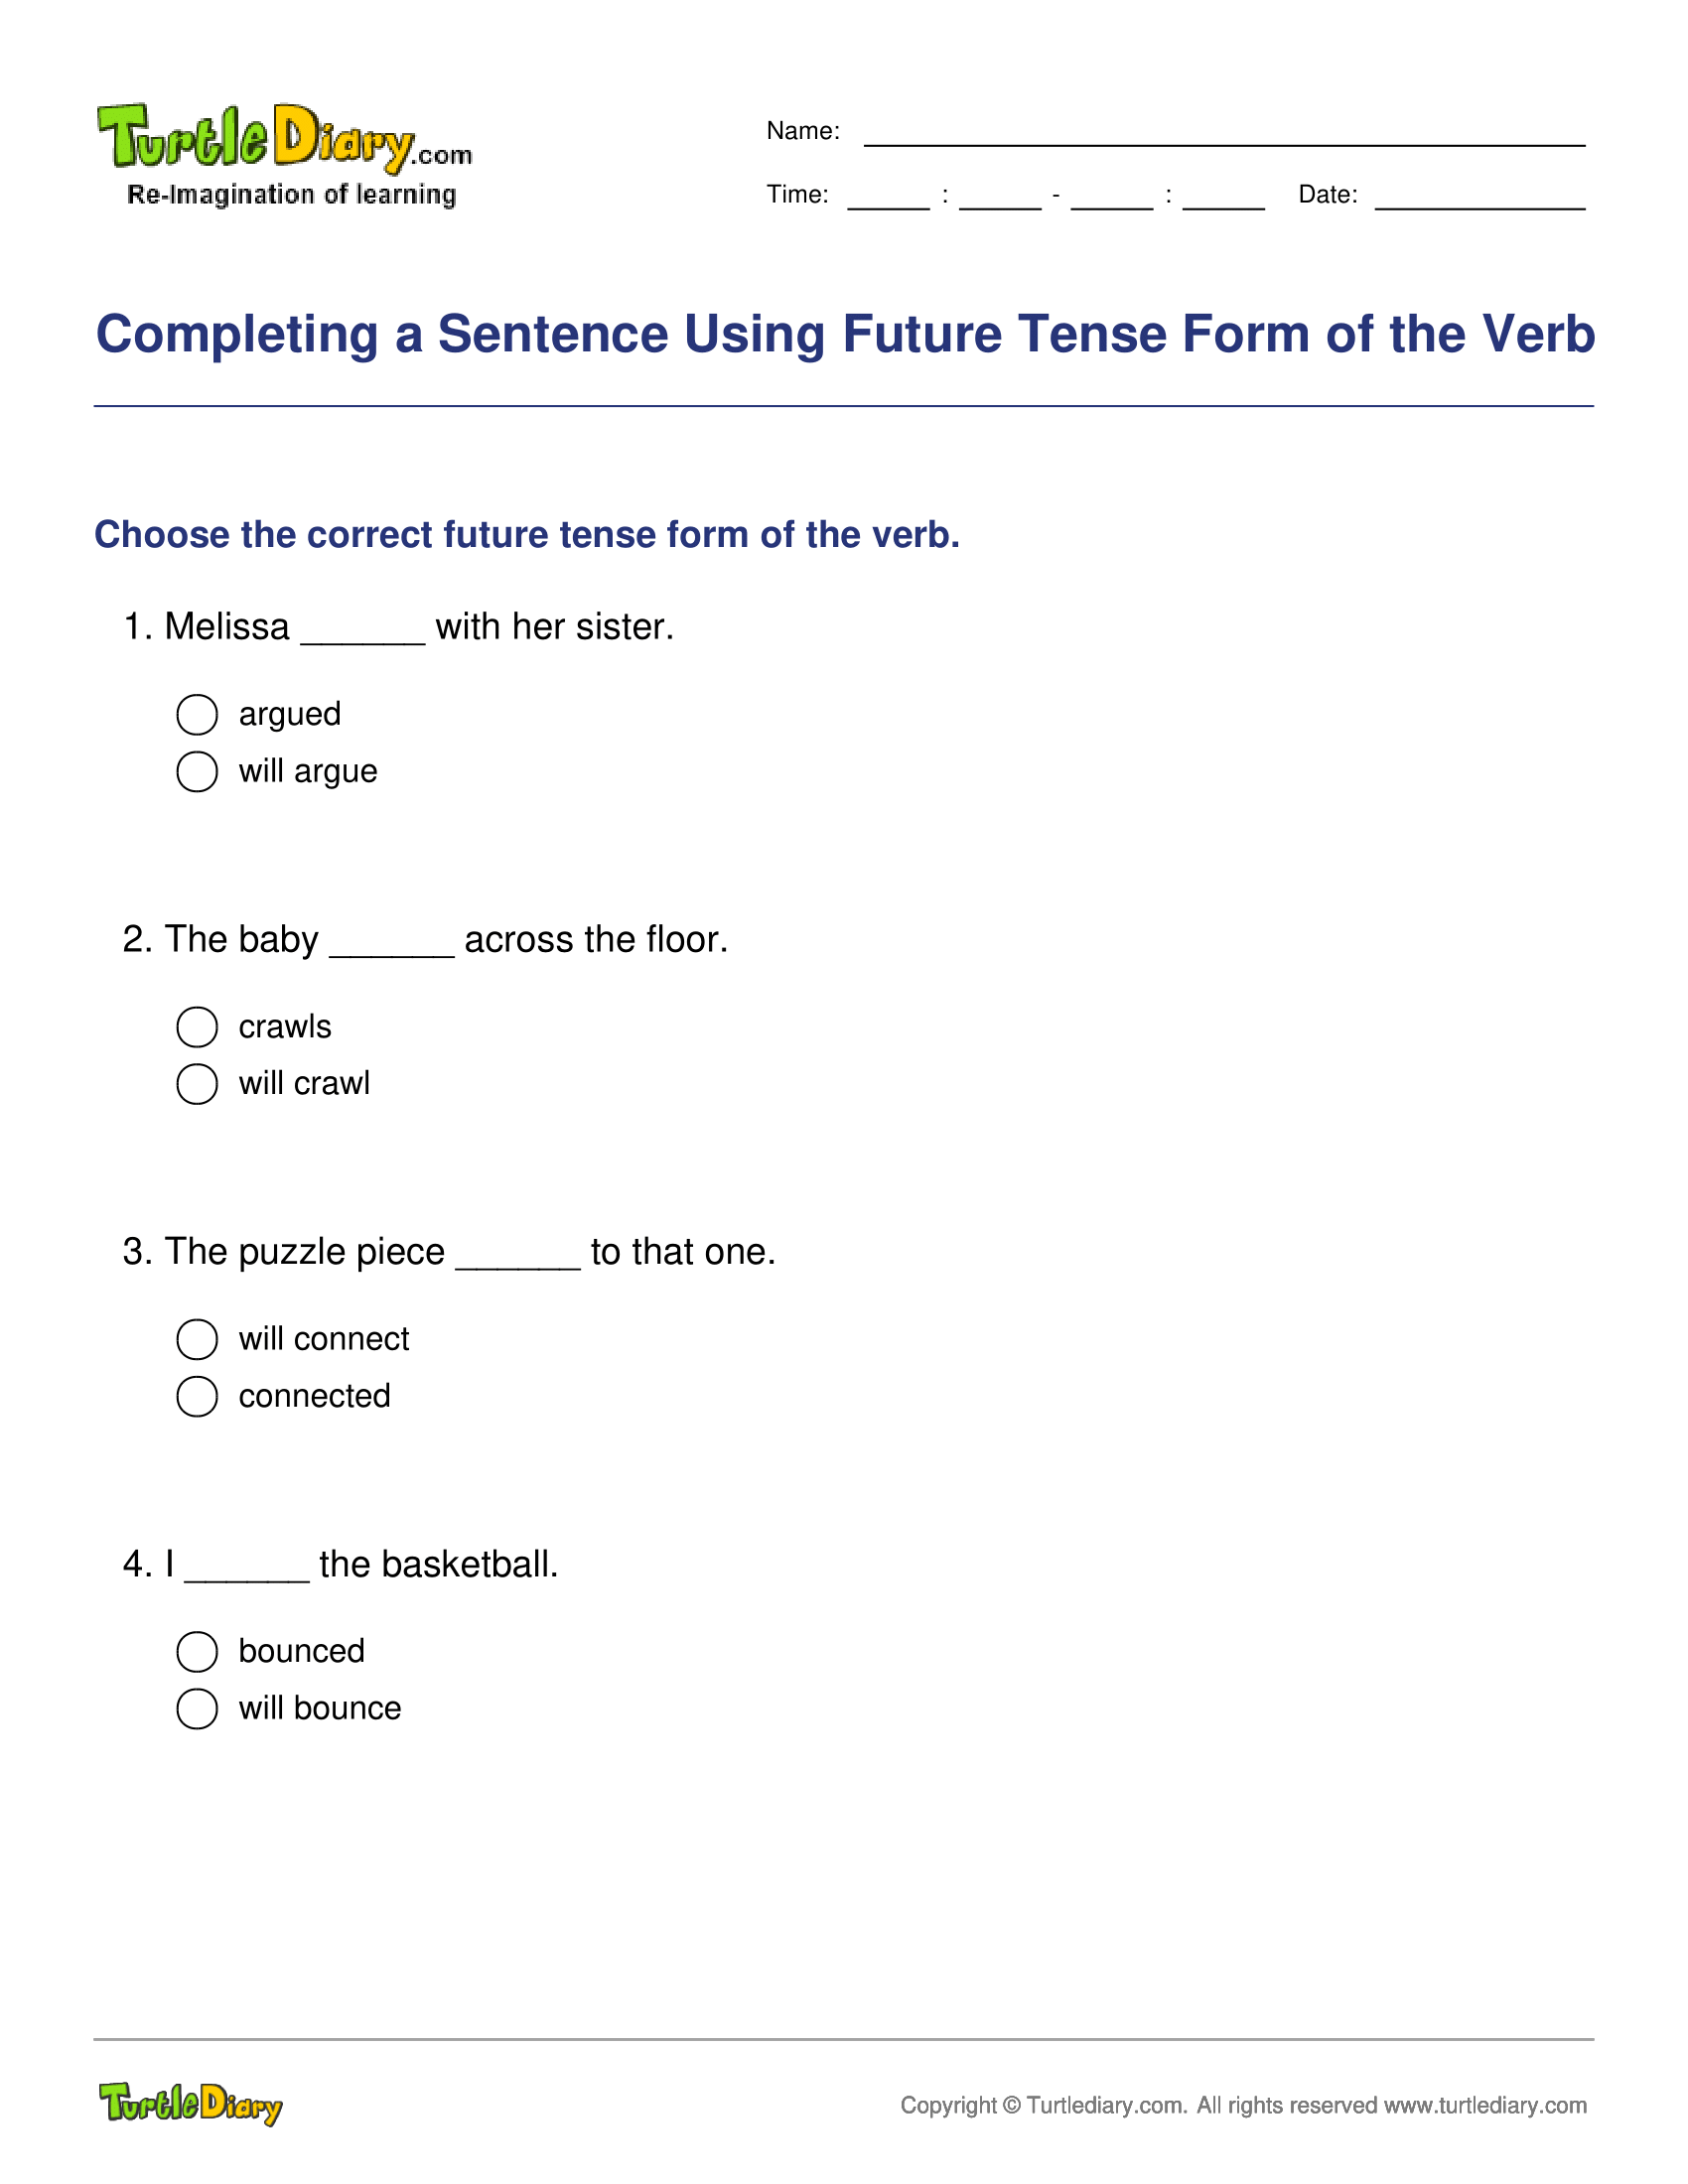 Completing a Sentence Using Future Tense Form of the Verb